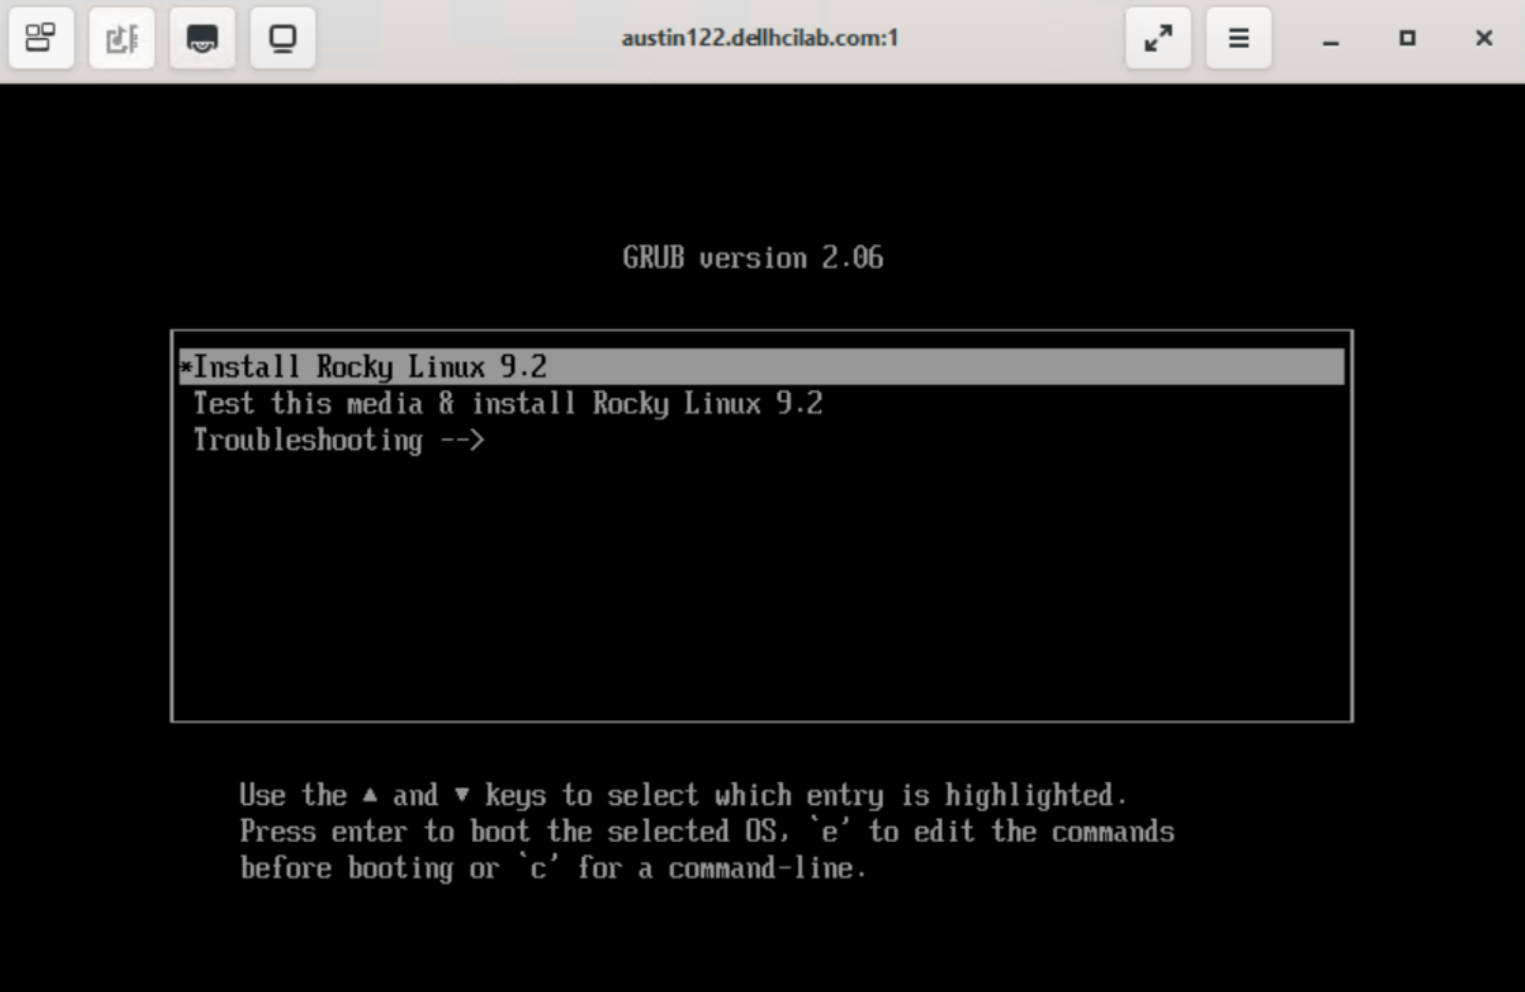 A screenshot showing that the OVM VM has been created.